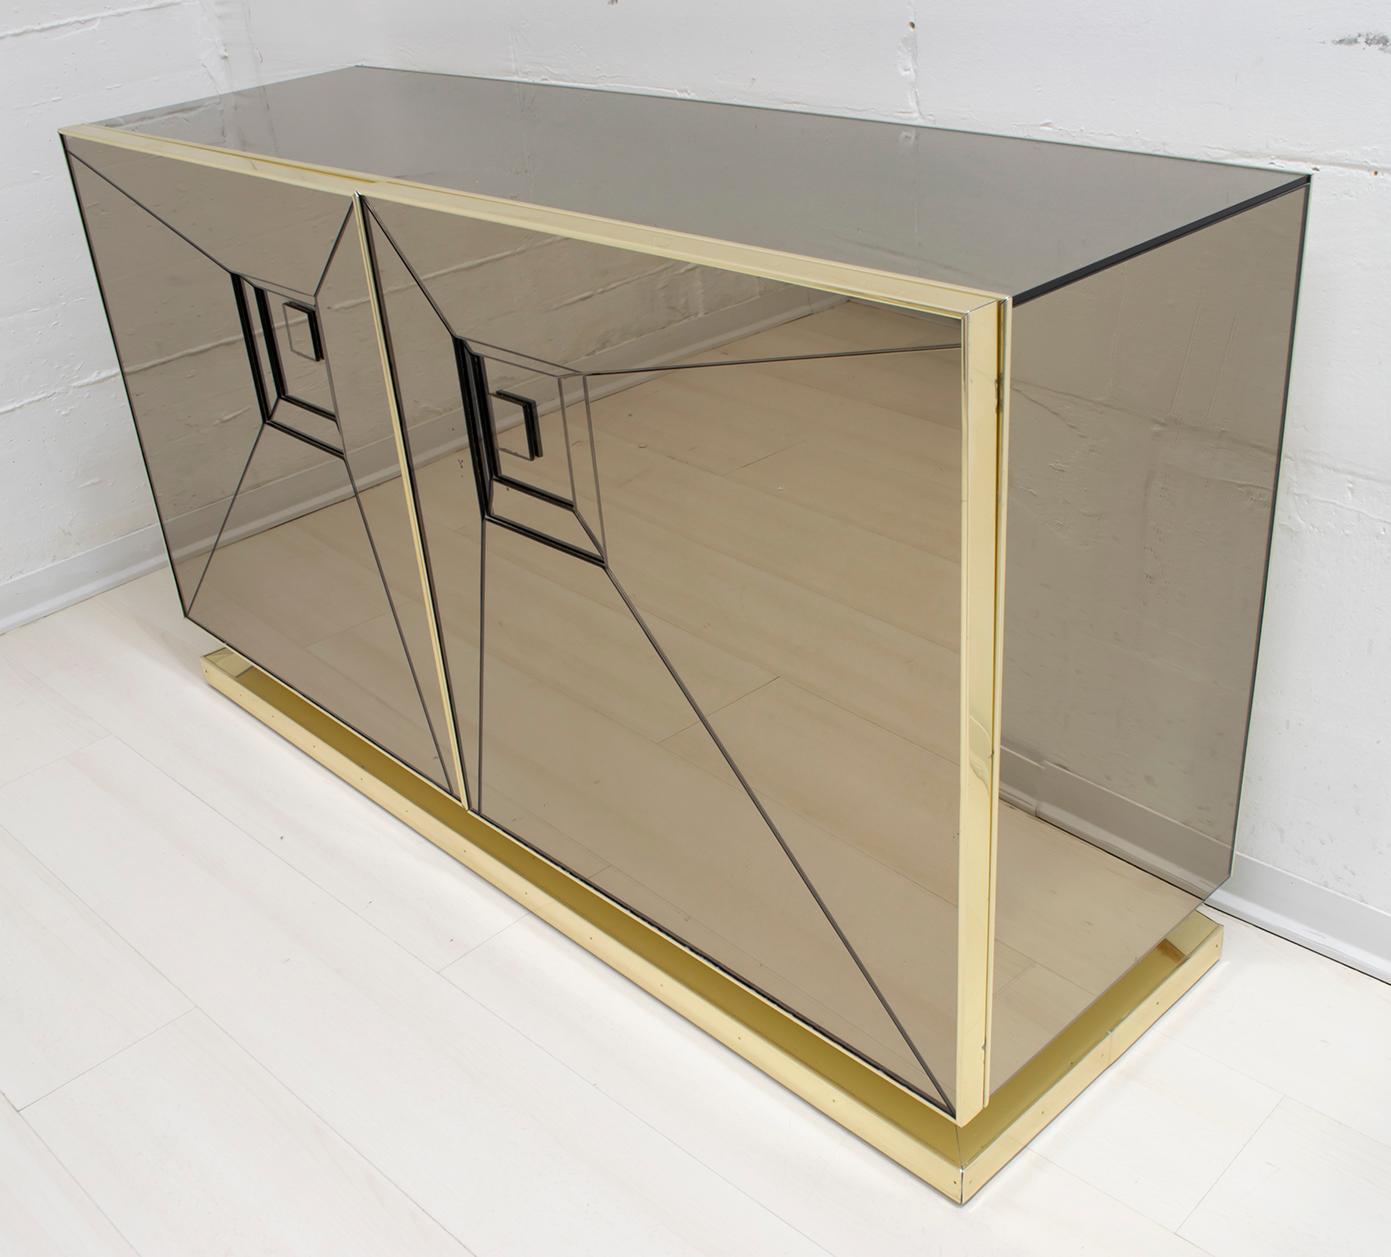 Late 20th Century After Ello Furniture Mid-Century Modern Mirrored Credenza Cabinet